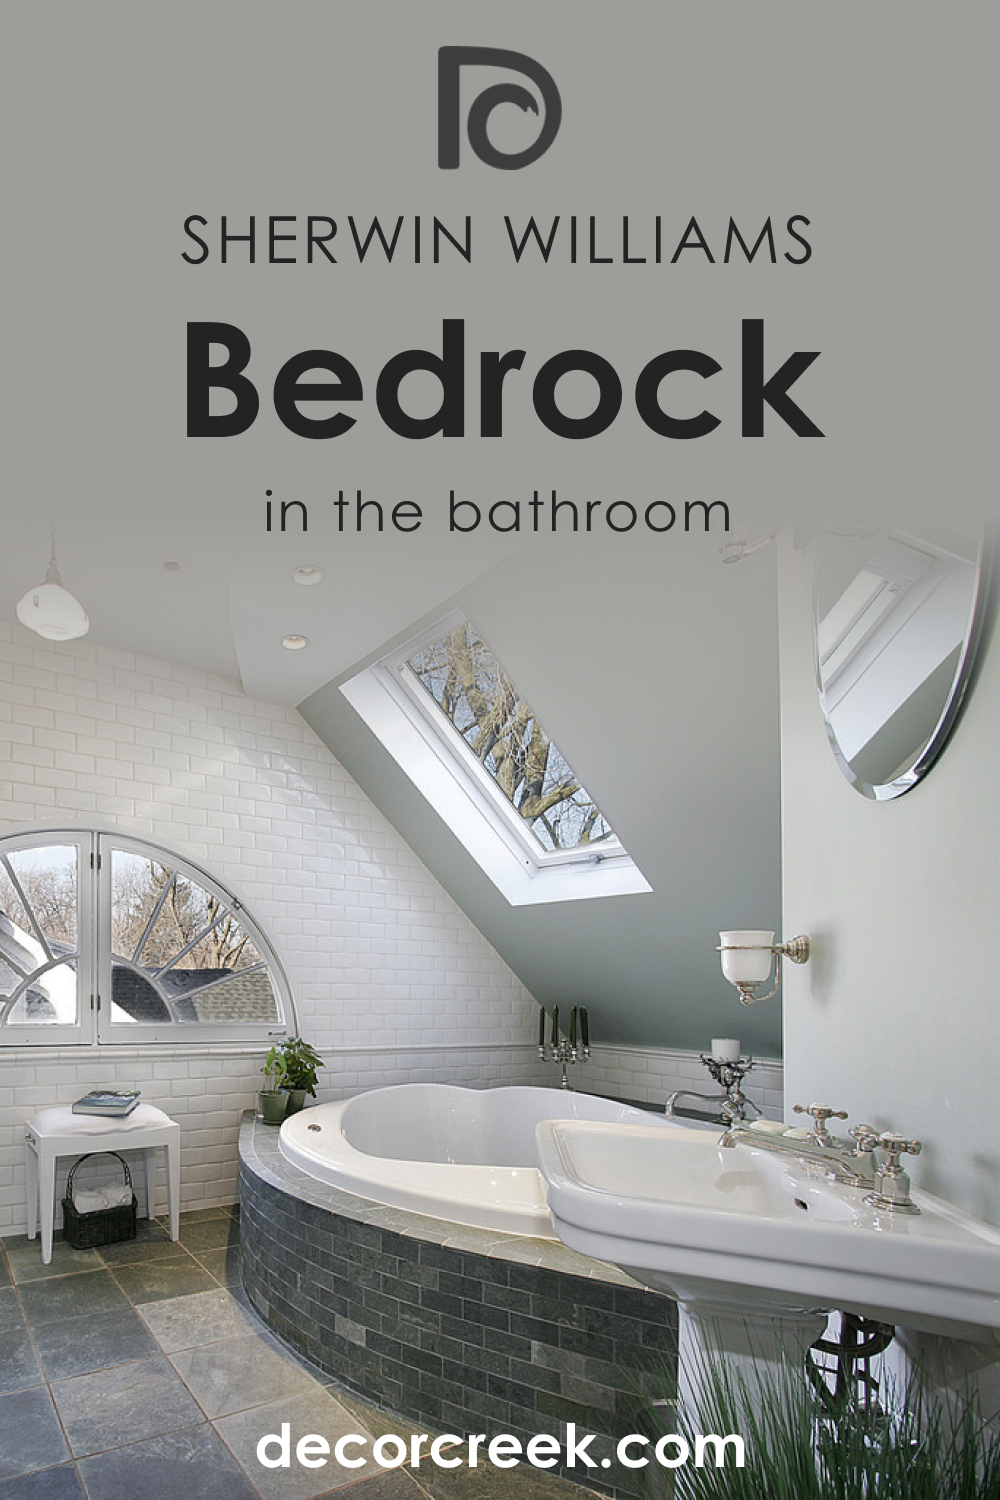 How to Use SW 9563 Bedrock in the Bathroom?